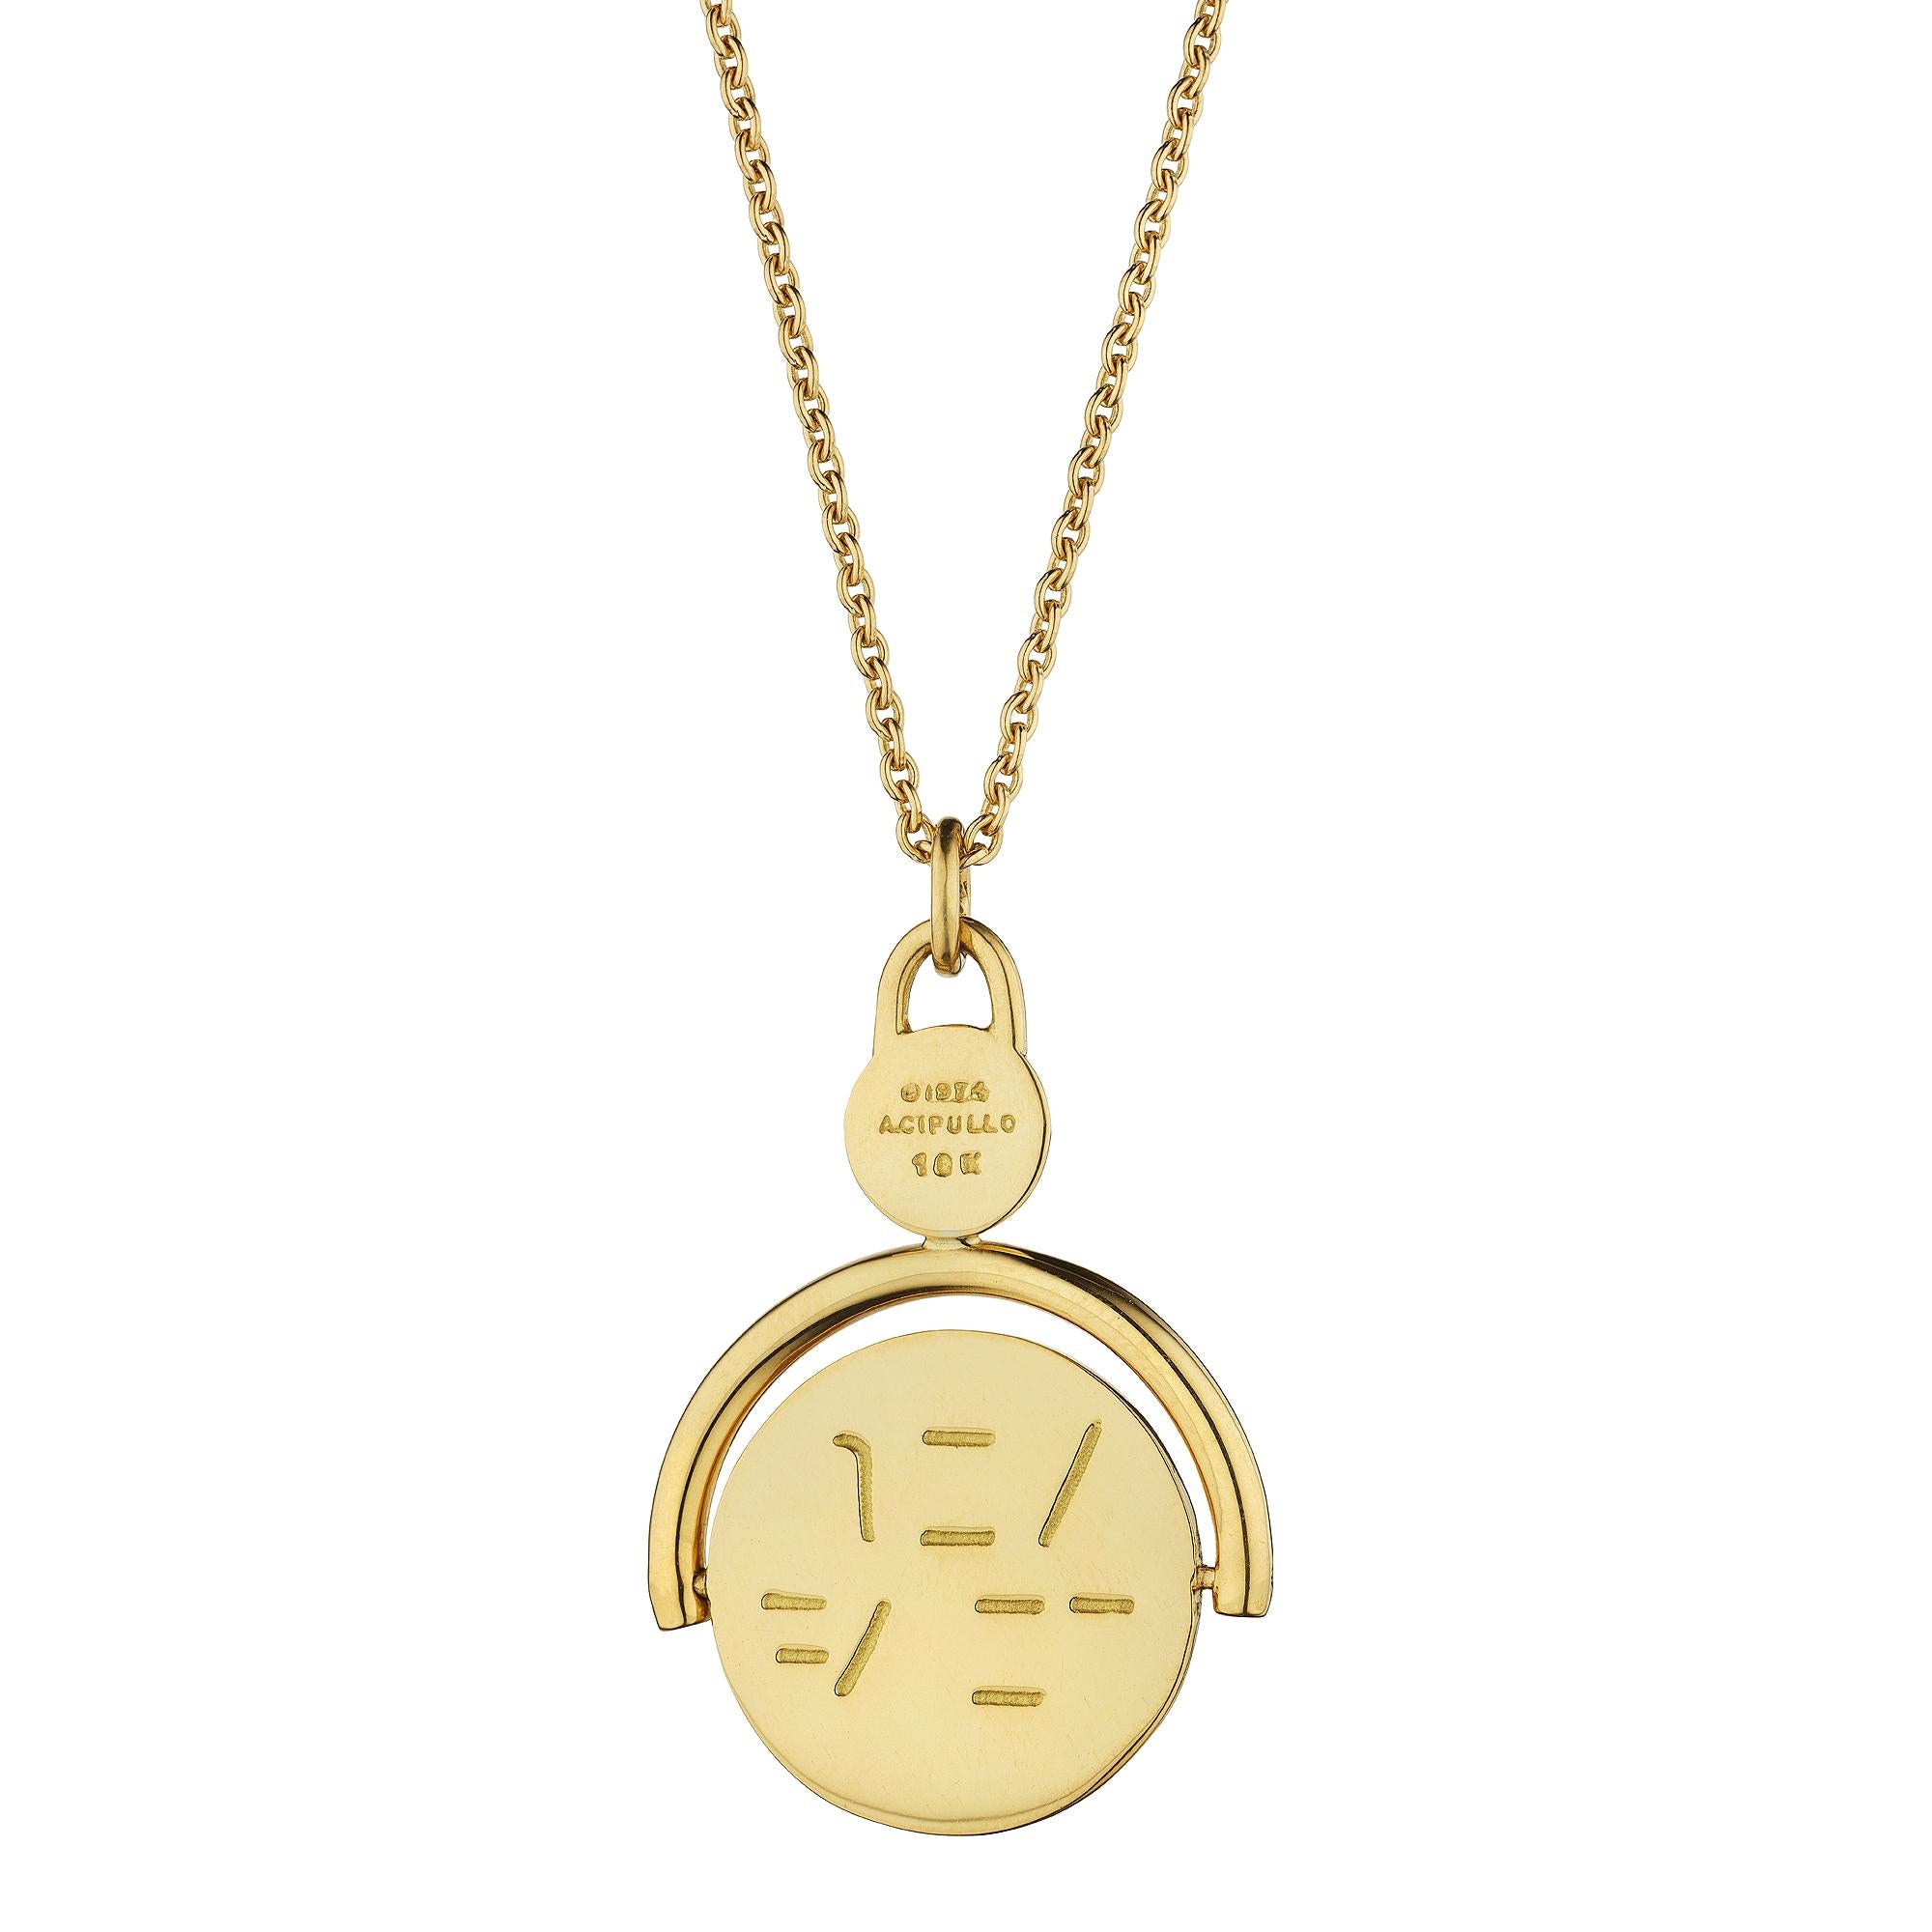 Take a romantic spin with this Aldo Cipullo gold 'I LOVE YOU' modernist pendant necklace.  Just spin the gold pendant disc and the words I LOVE YOU magically appear for all to see.  Circa 1974.  Signed A. Cipullo. The spinning pendant disc is 3/4